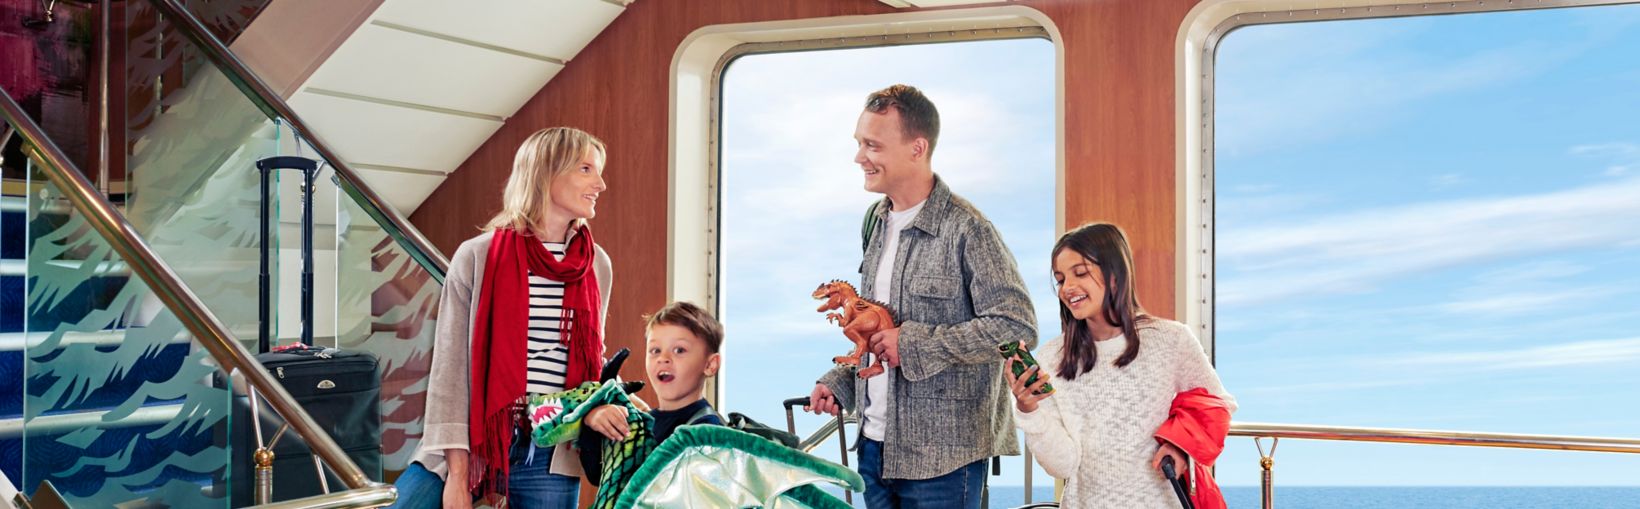 Family carrying luggage and a dragon climbing stairs to their cabin on a ferry 